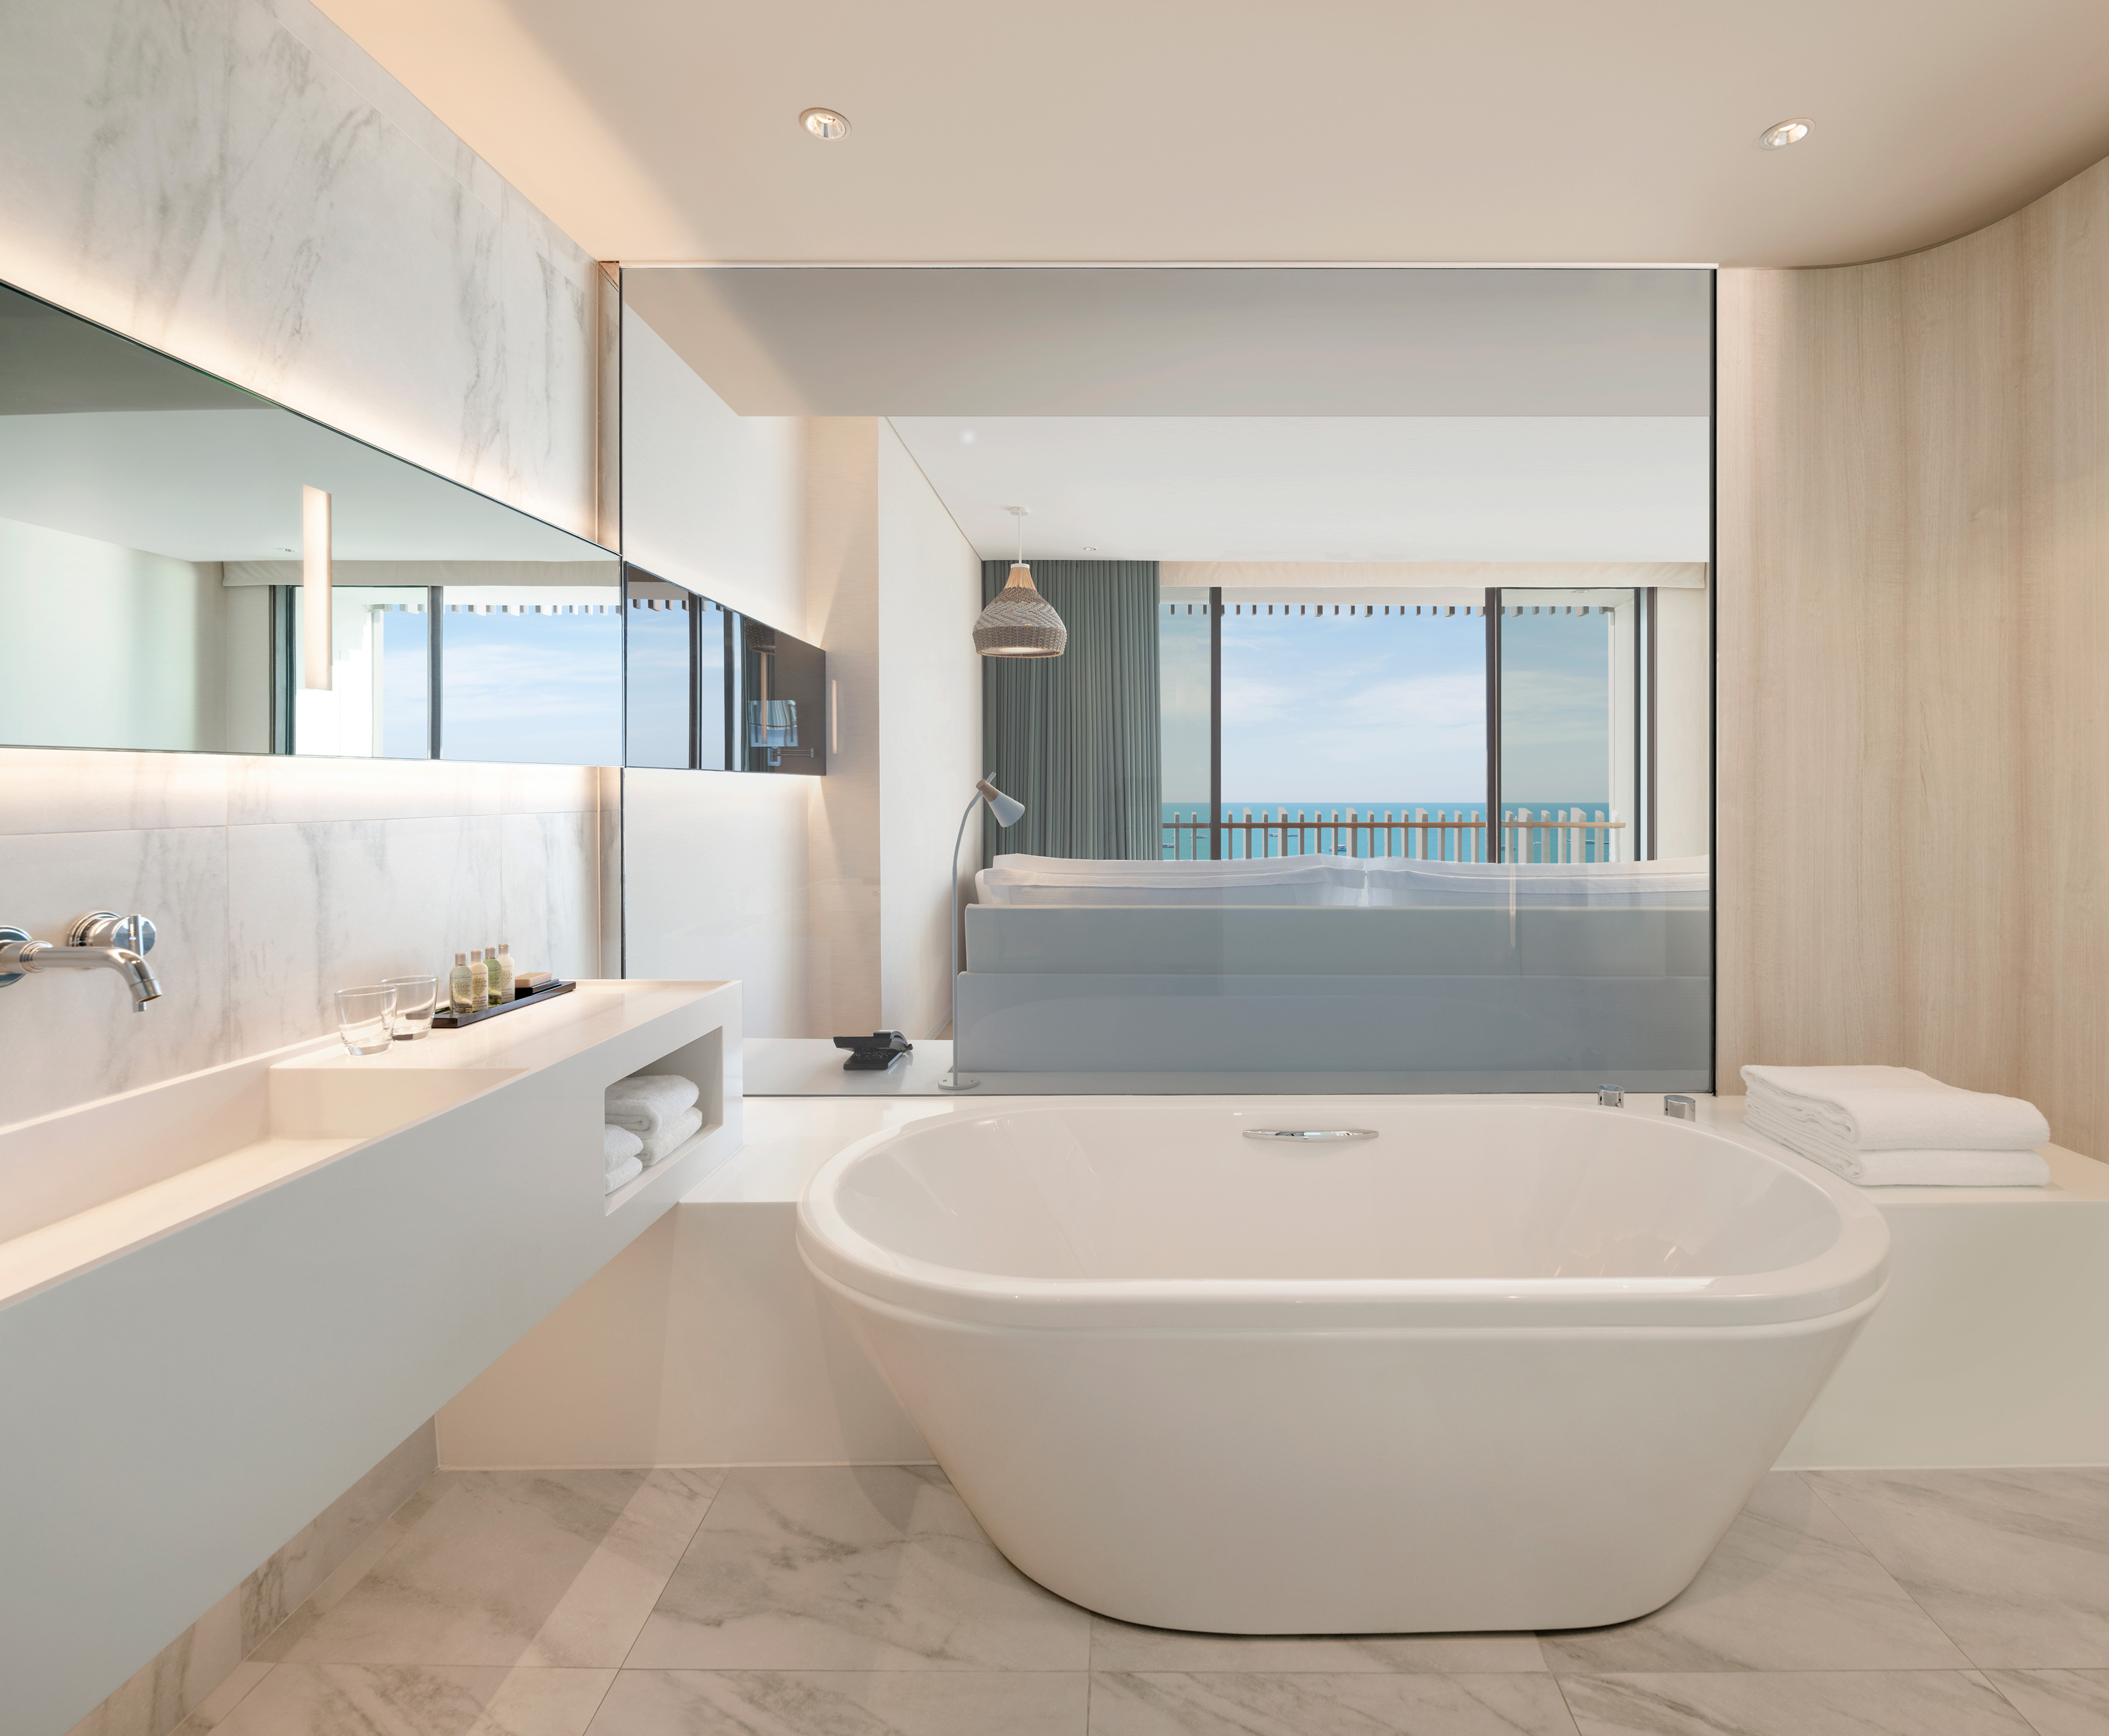 Vanity Area and Bathtub of Guest Room with Ocean View